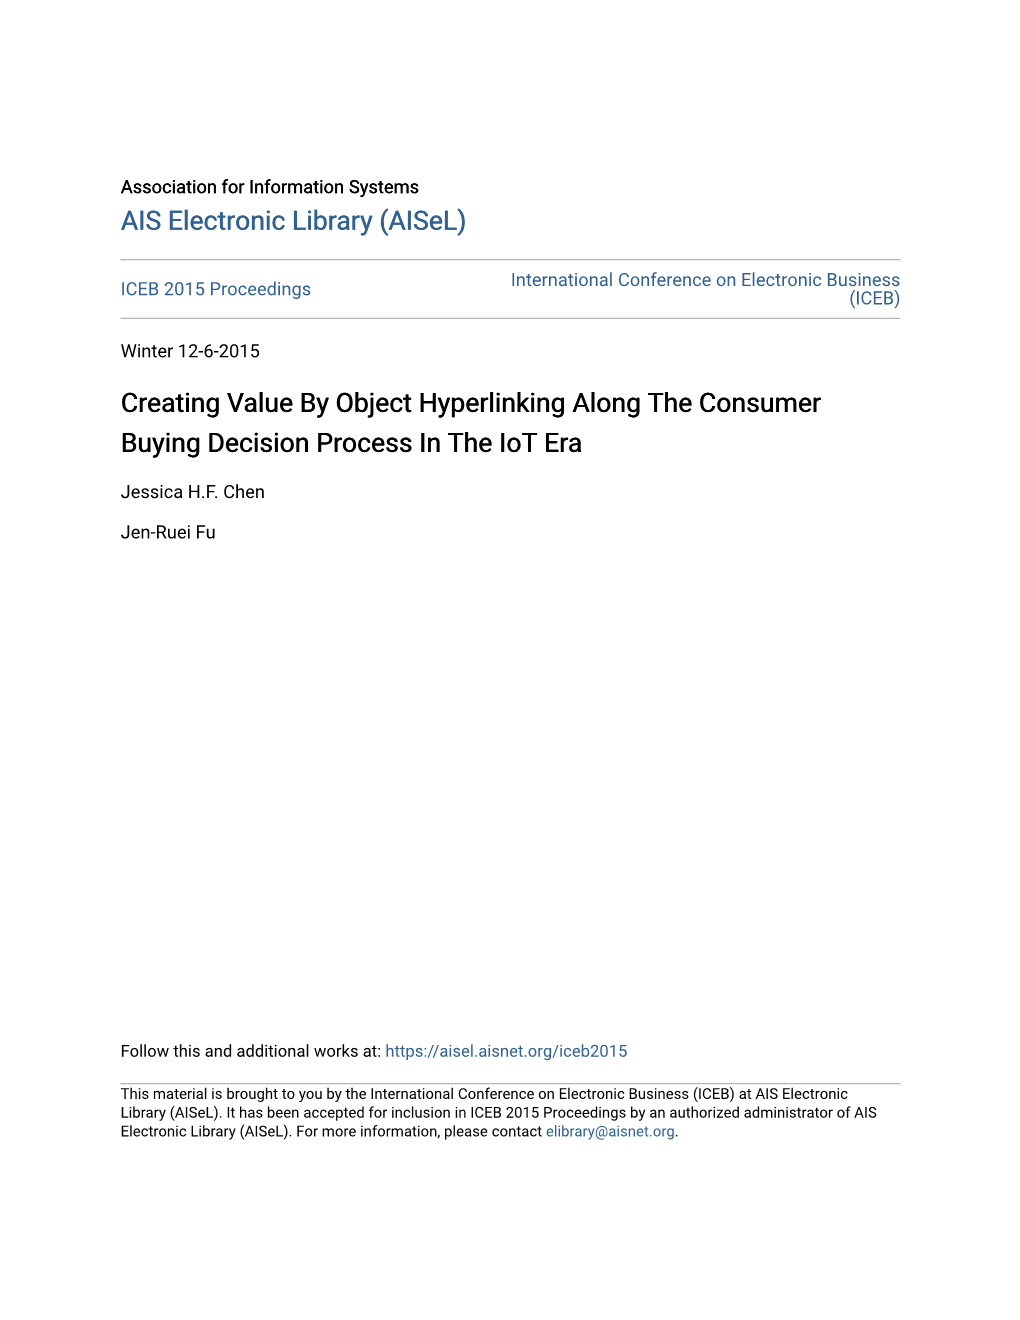 Creating Value by Object Hyperlinking Along the Consumer Buying Decision Process in the Iot Era